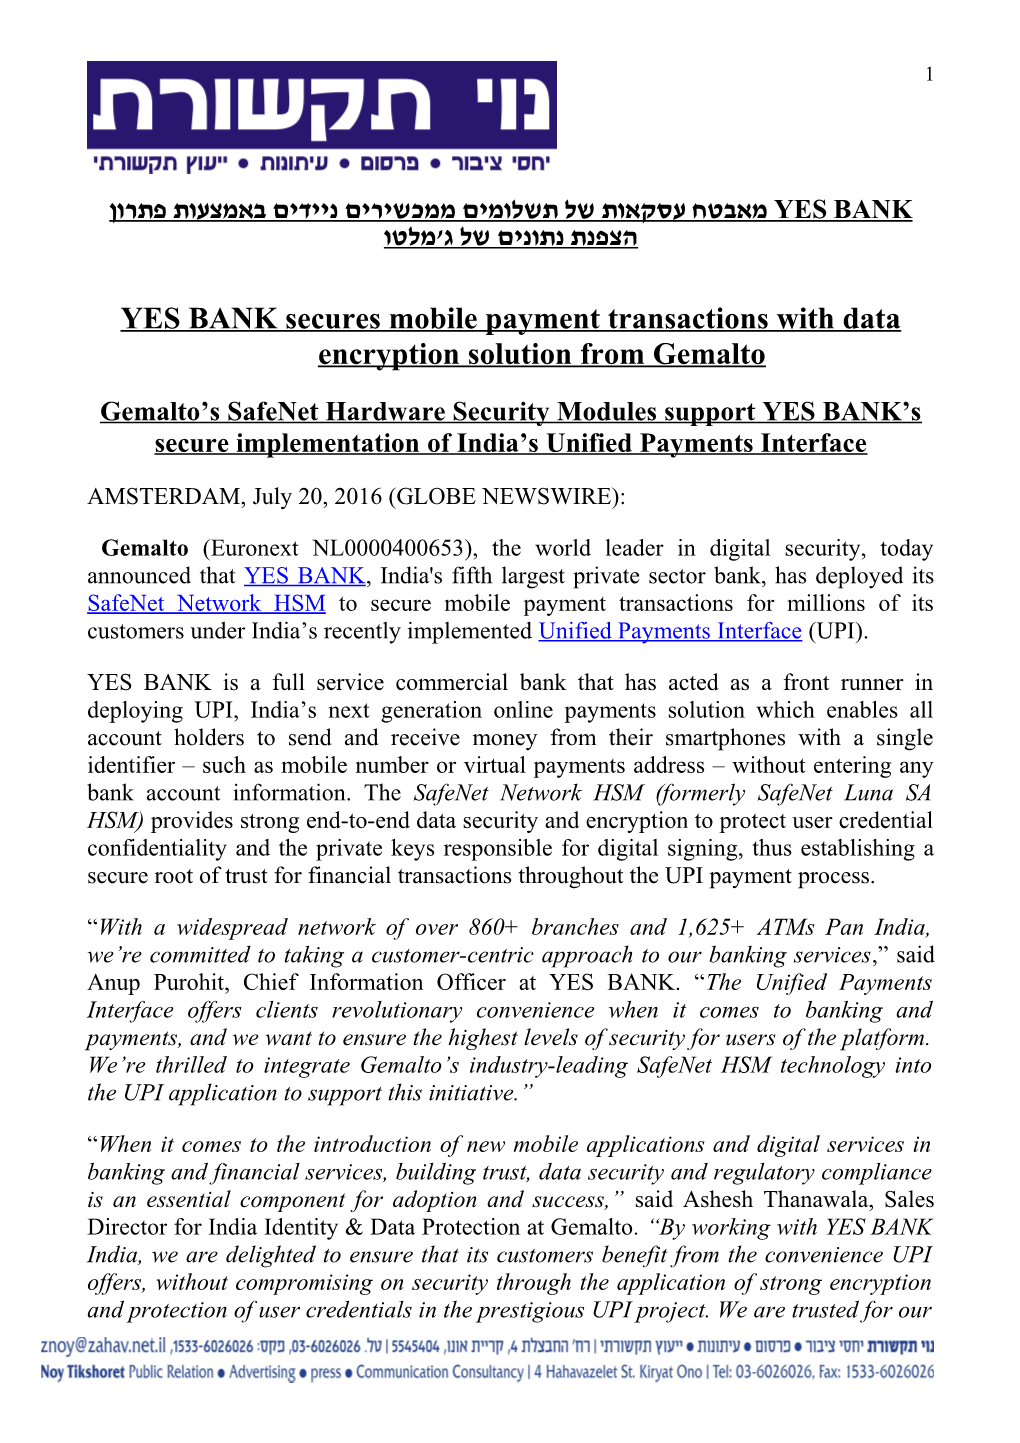 YES BANK Secures Mobile Payment Transactions with Data Encryption Solution from Gemalto